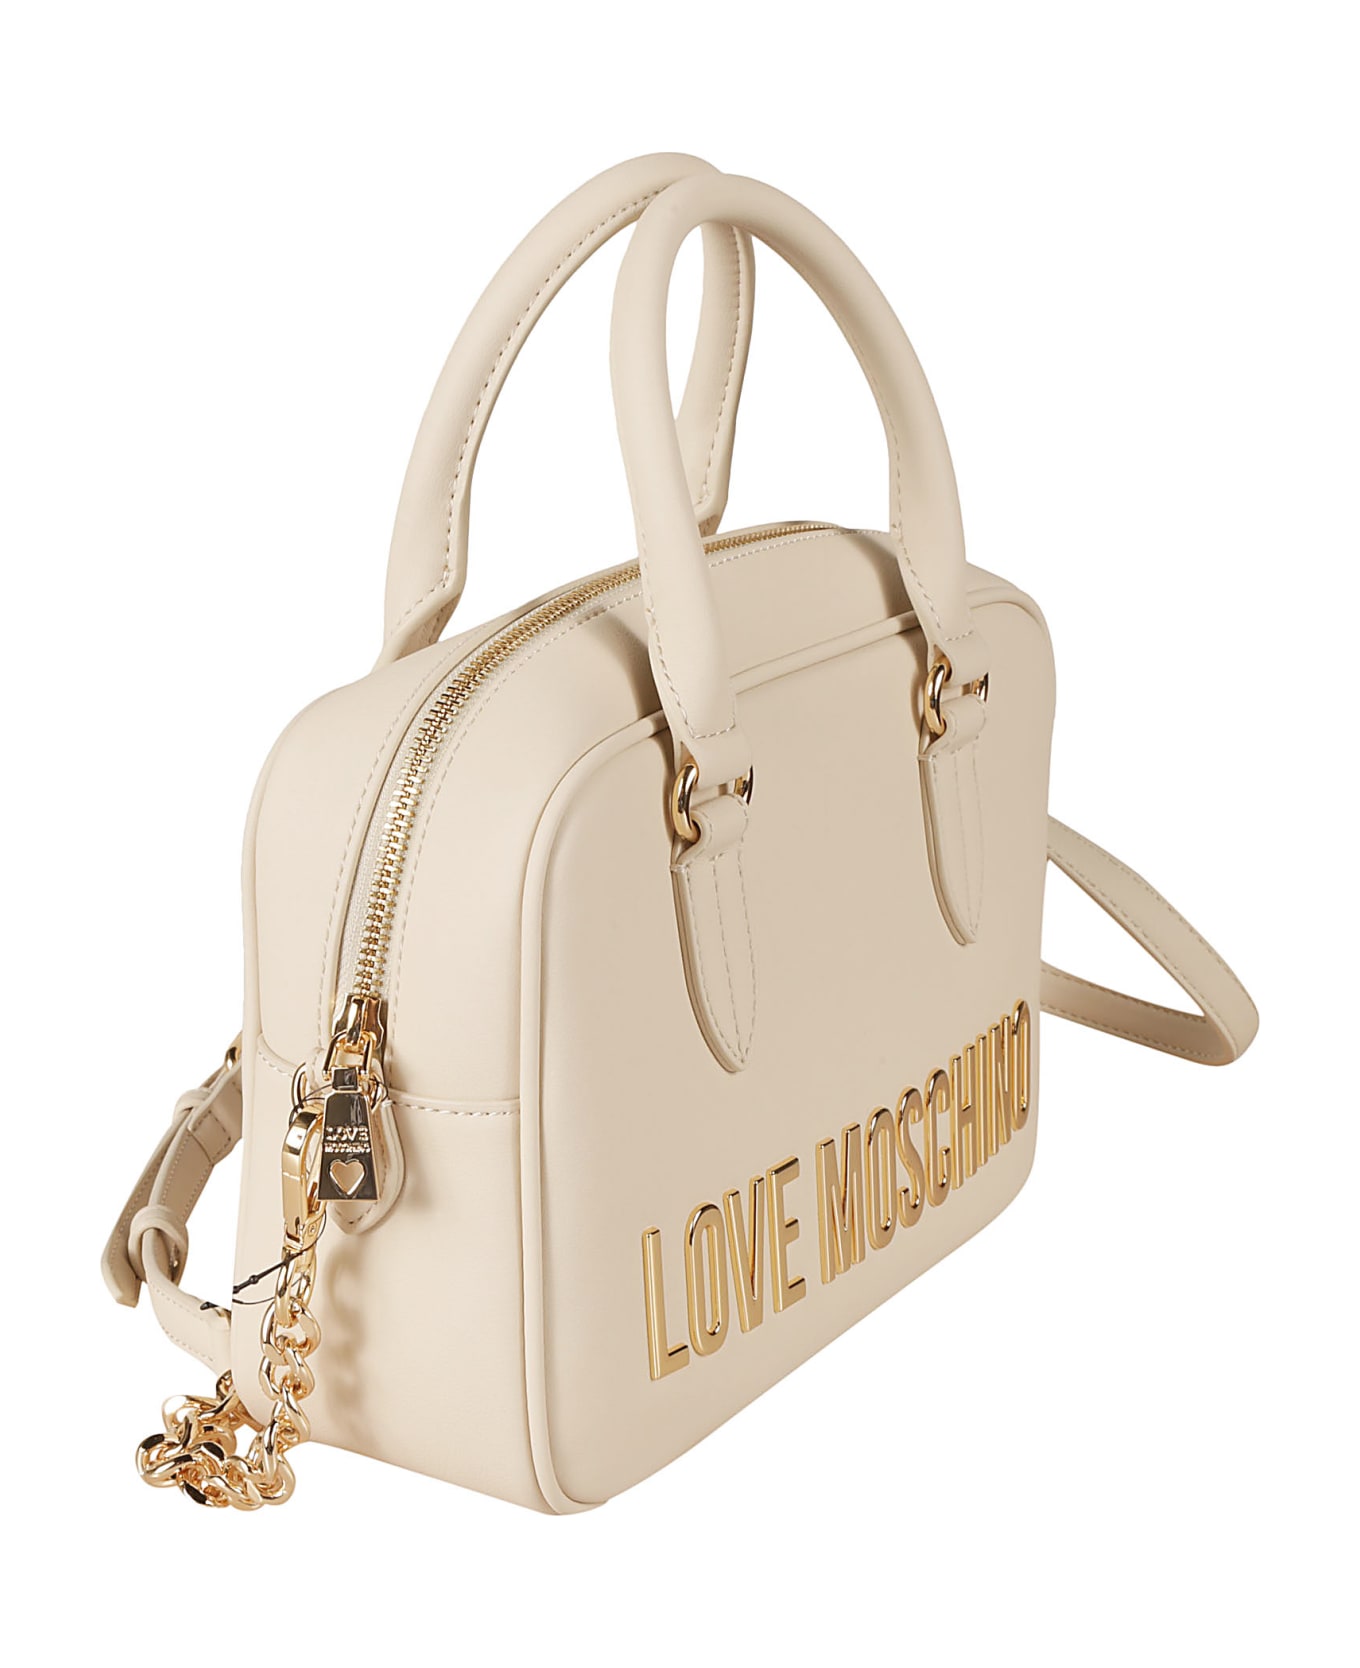 Love Moschino Round Top Handle Logo Embossed Shoulder Bag - Ivory